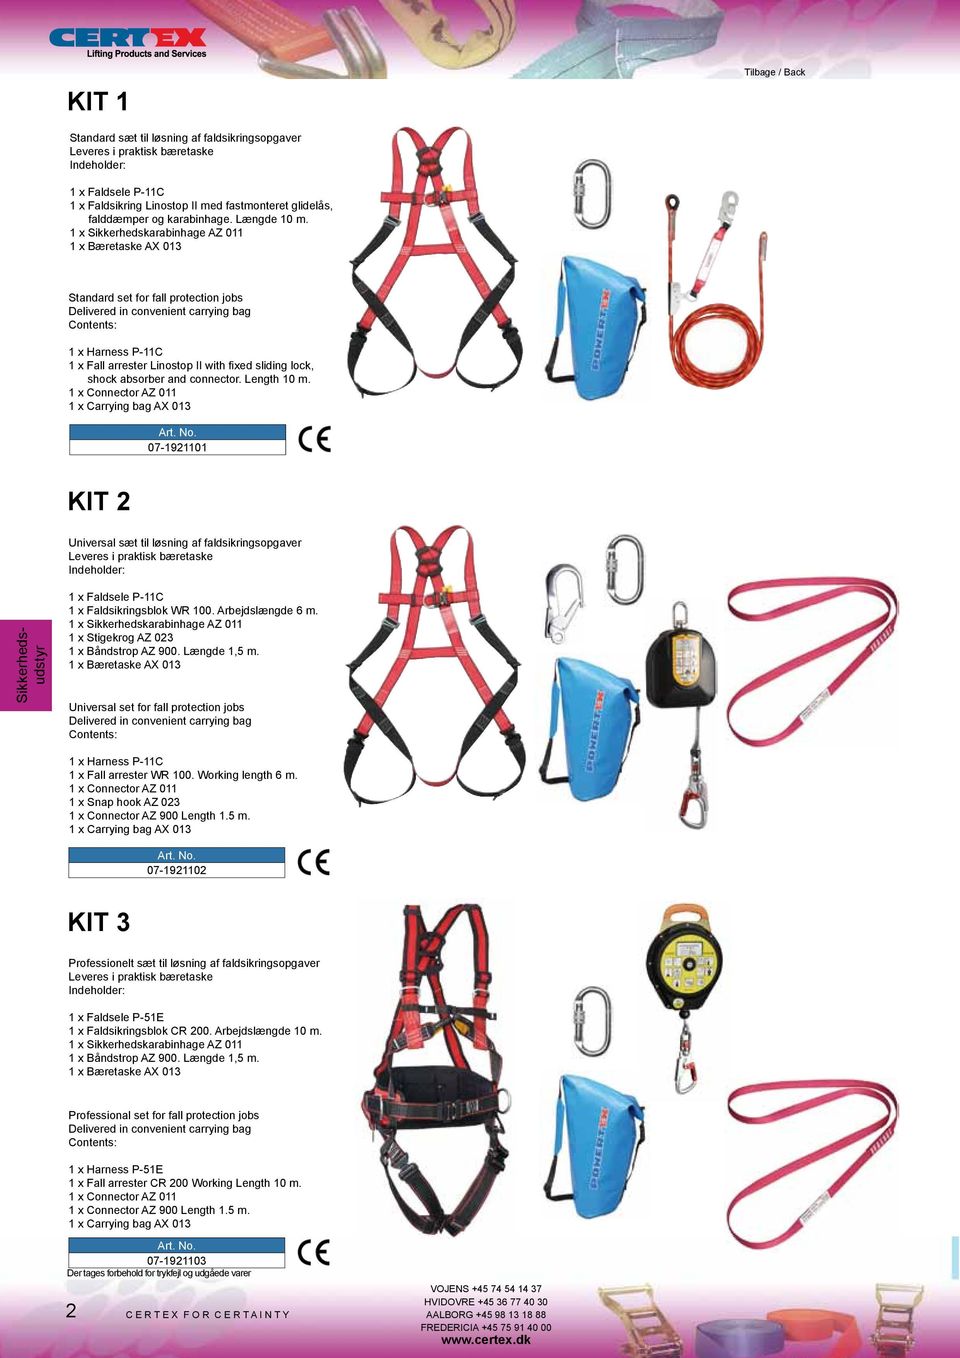 1 x Sikkerhedskarabinhage AZ 011 1 x Bæretaske AX 013 Standard set for fall protection jobs Delivered in convenient carrying bag Contents: 1 x Harness P-11C 1 x Fall arrester Linostop II with fixed